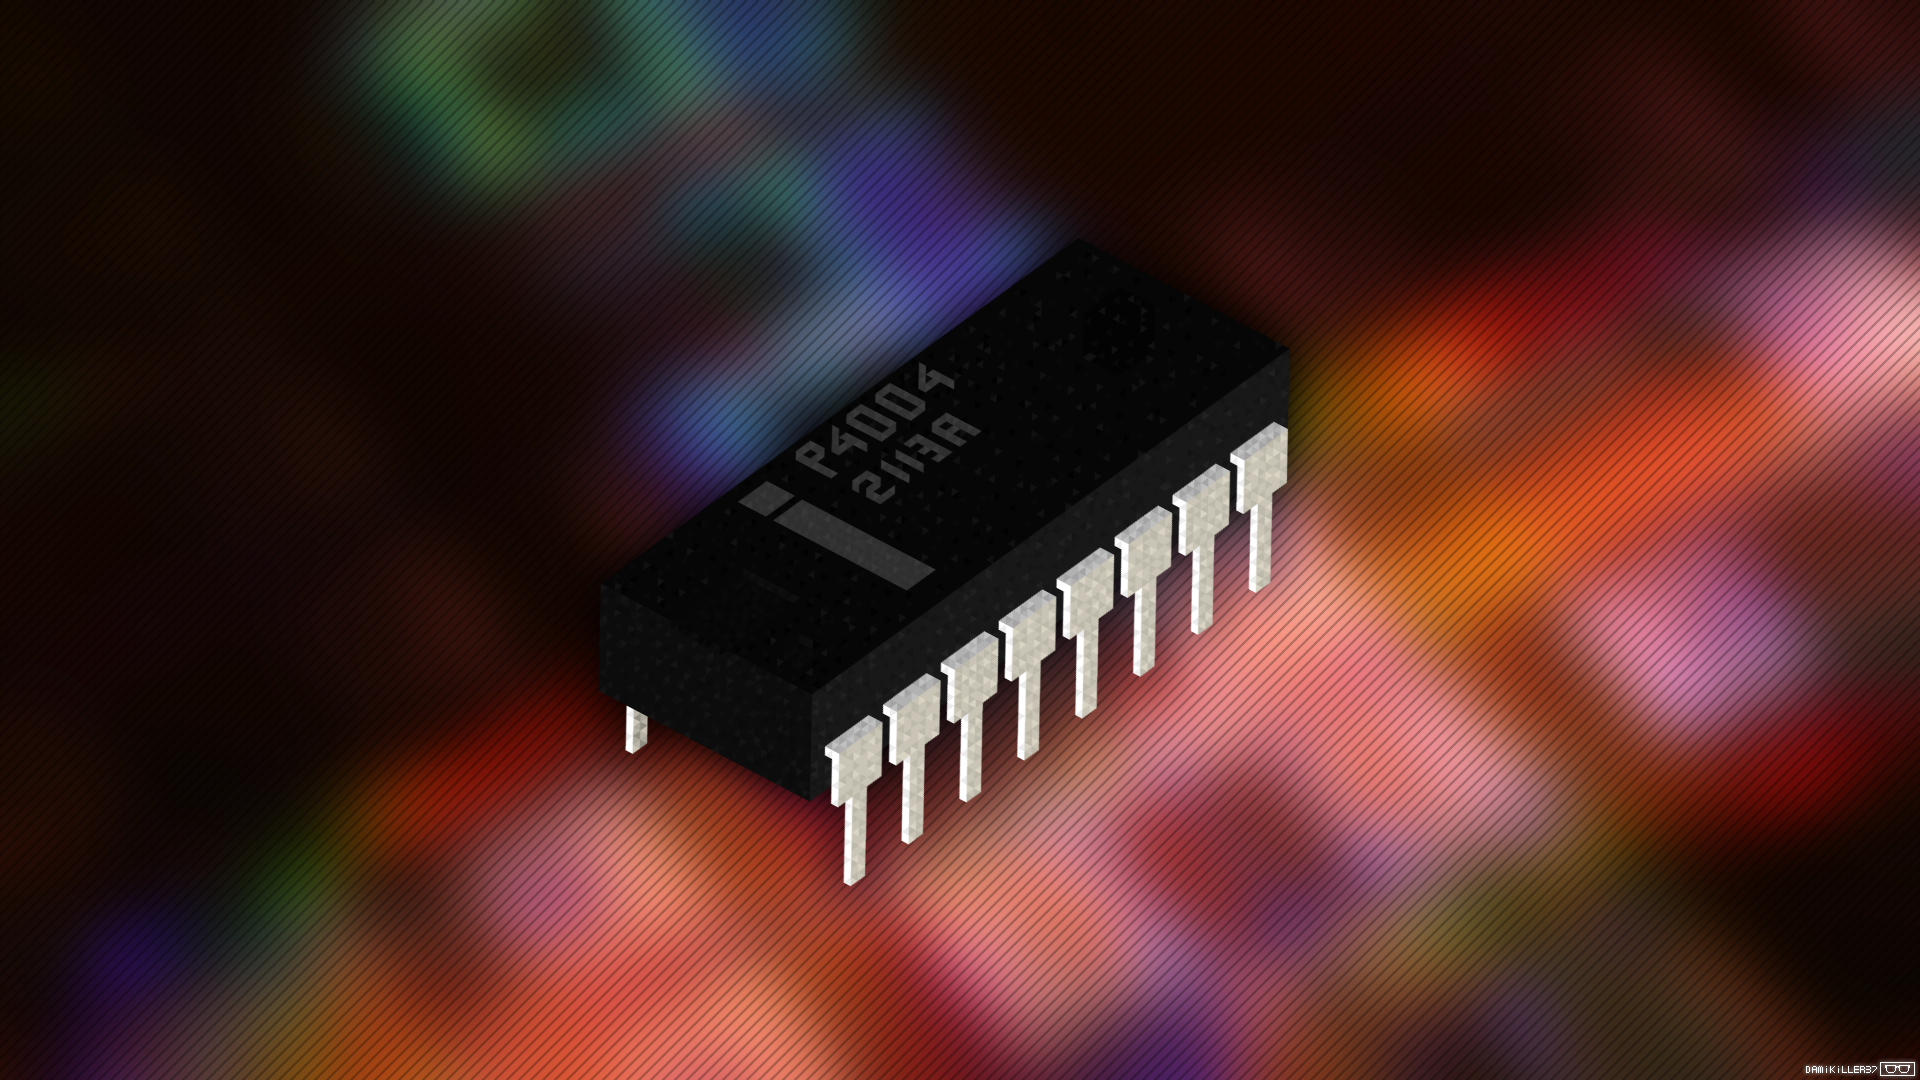 Integrated Circuit Image Wallpapers